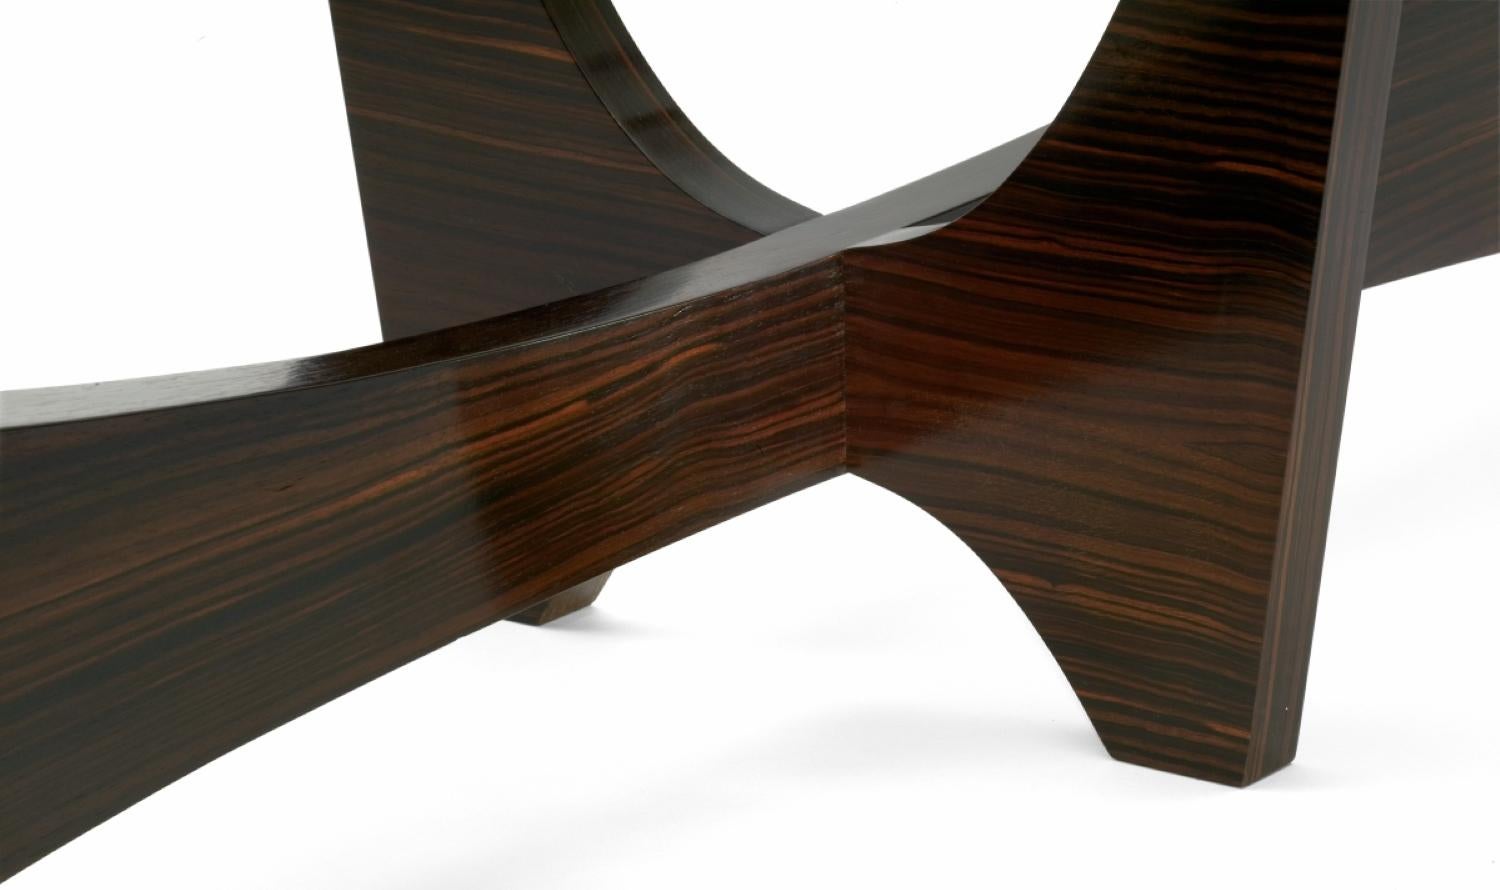 Surfboard shaped cocktail table in Macassar ebony and hand worked glass.

Available now in Inventory dimension: 21